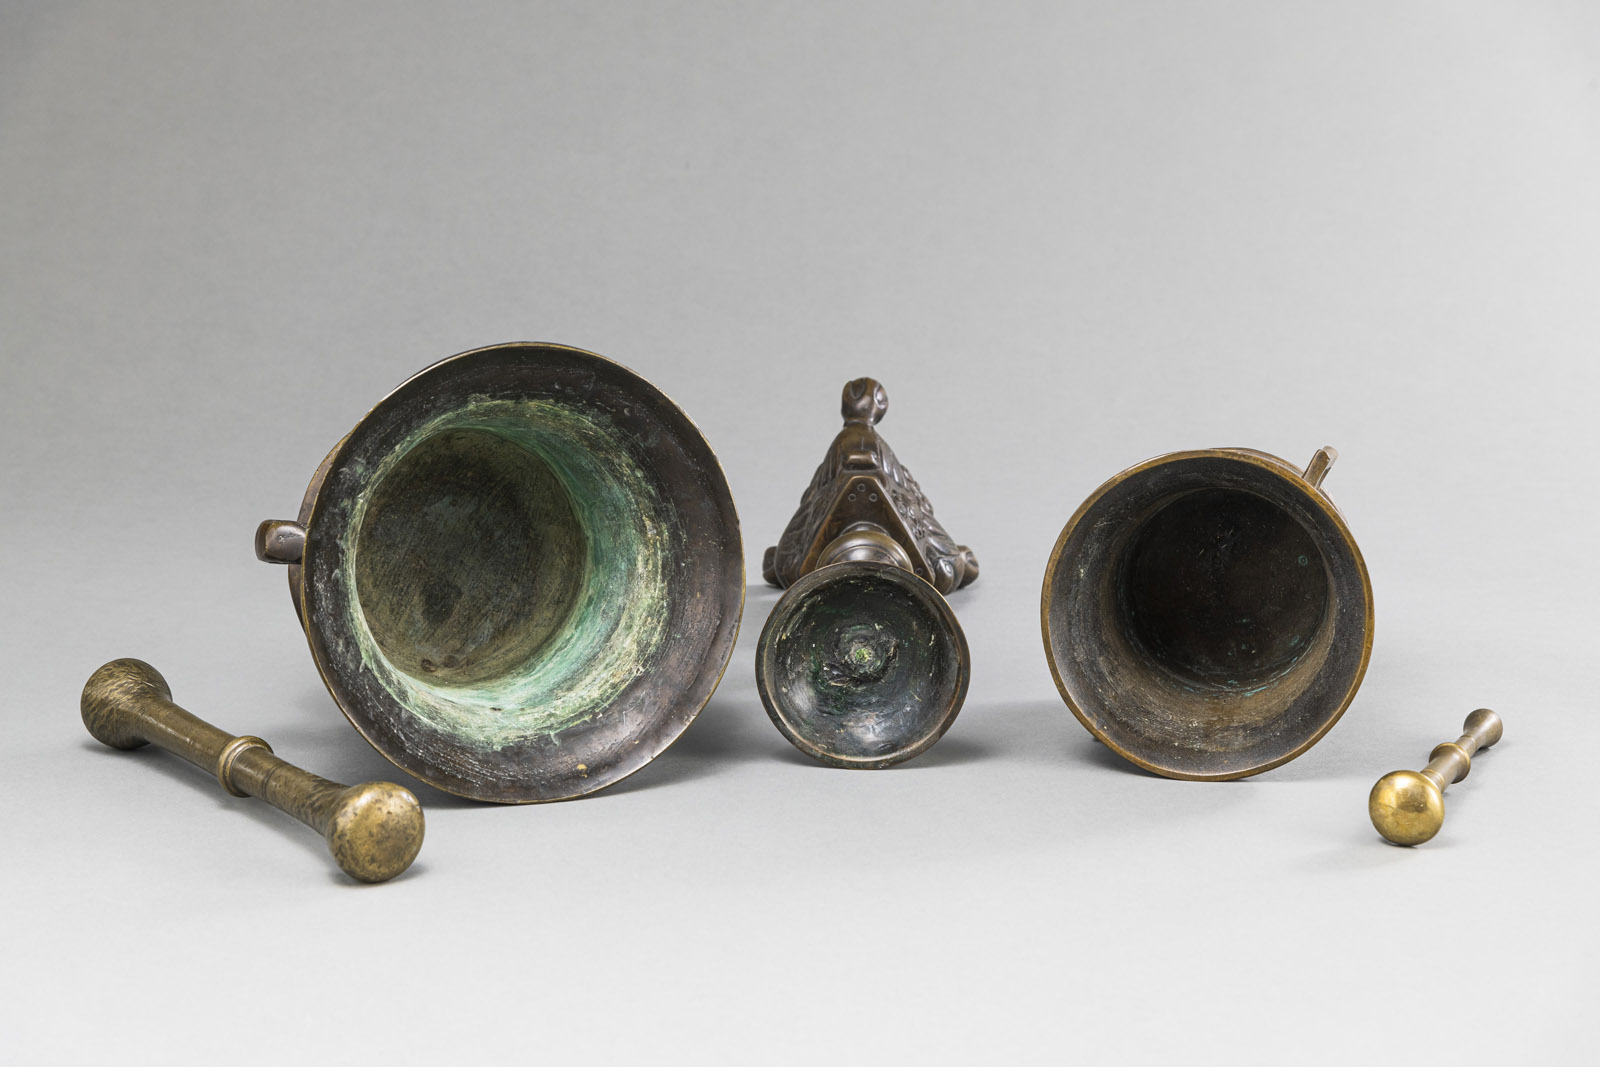 TWO BRONZE MORTARS WITH PESTLES AND A CANDLESTICK - Image 3 of 4